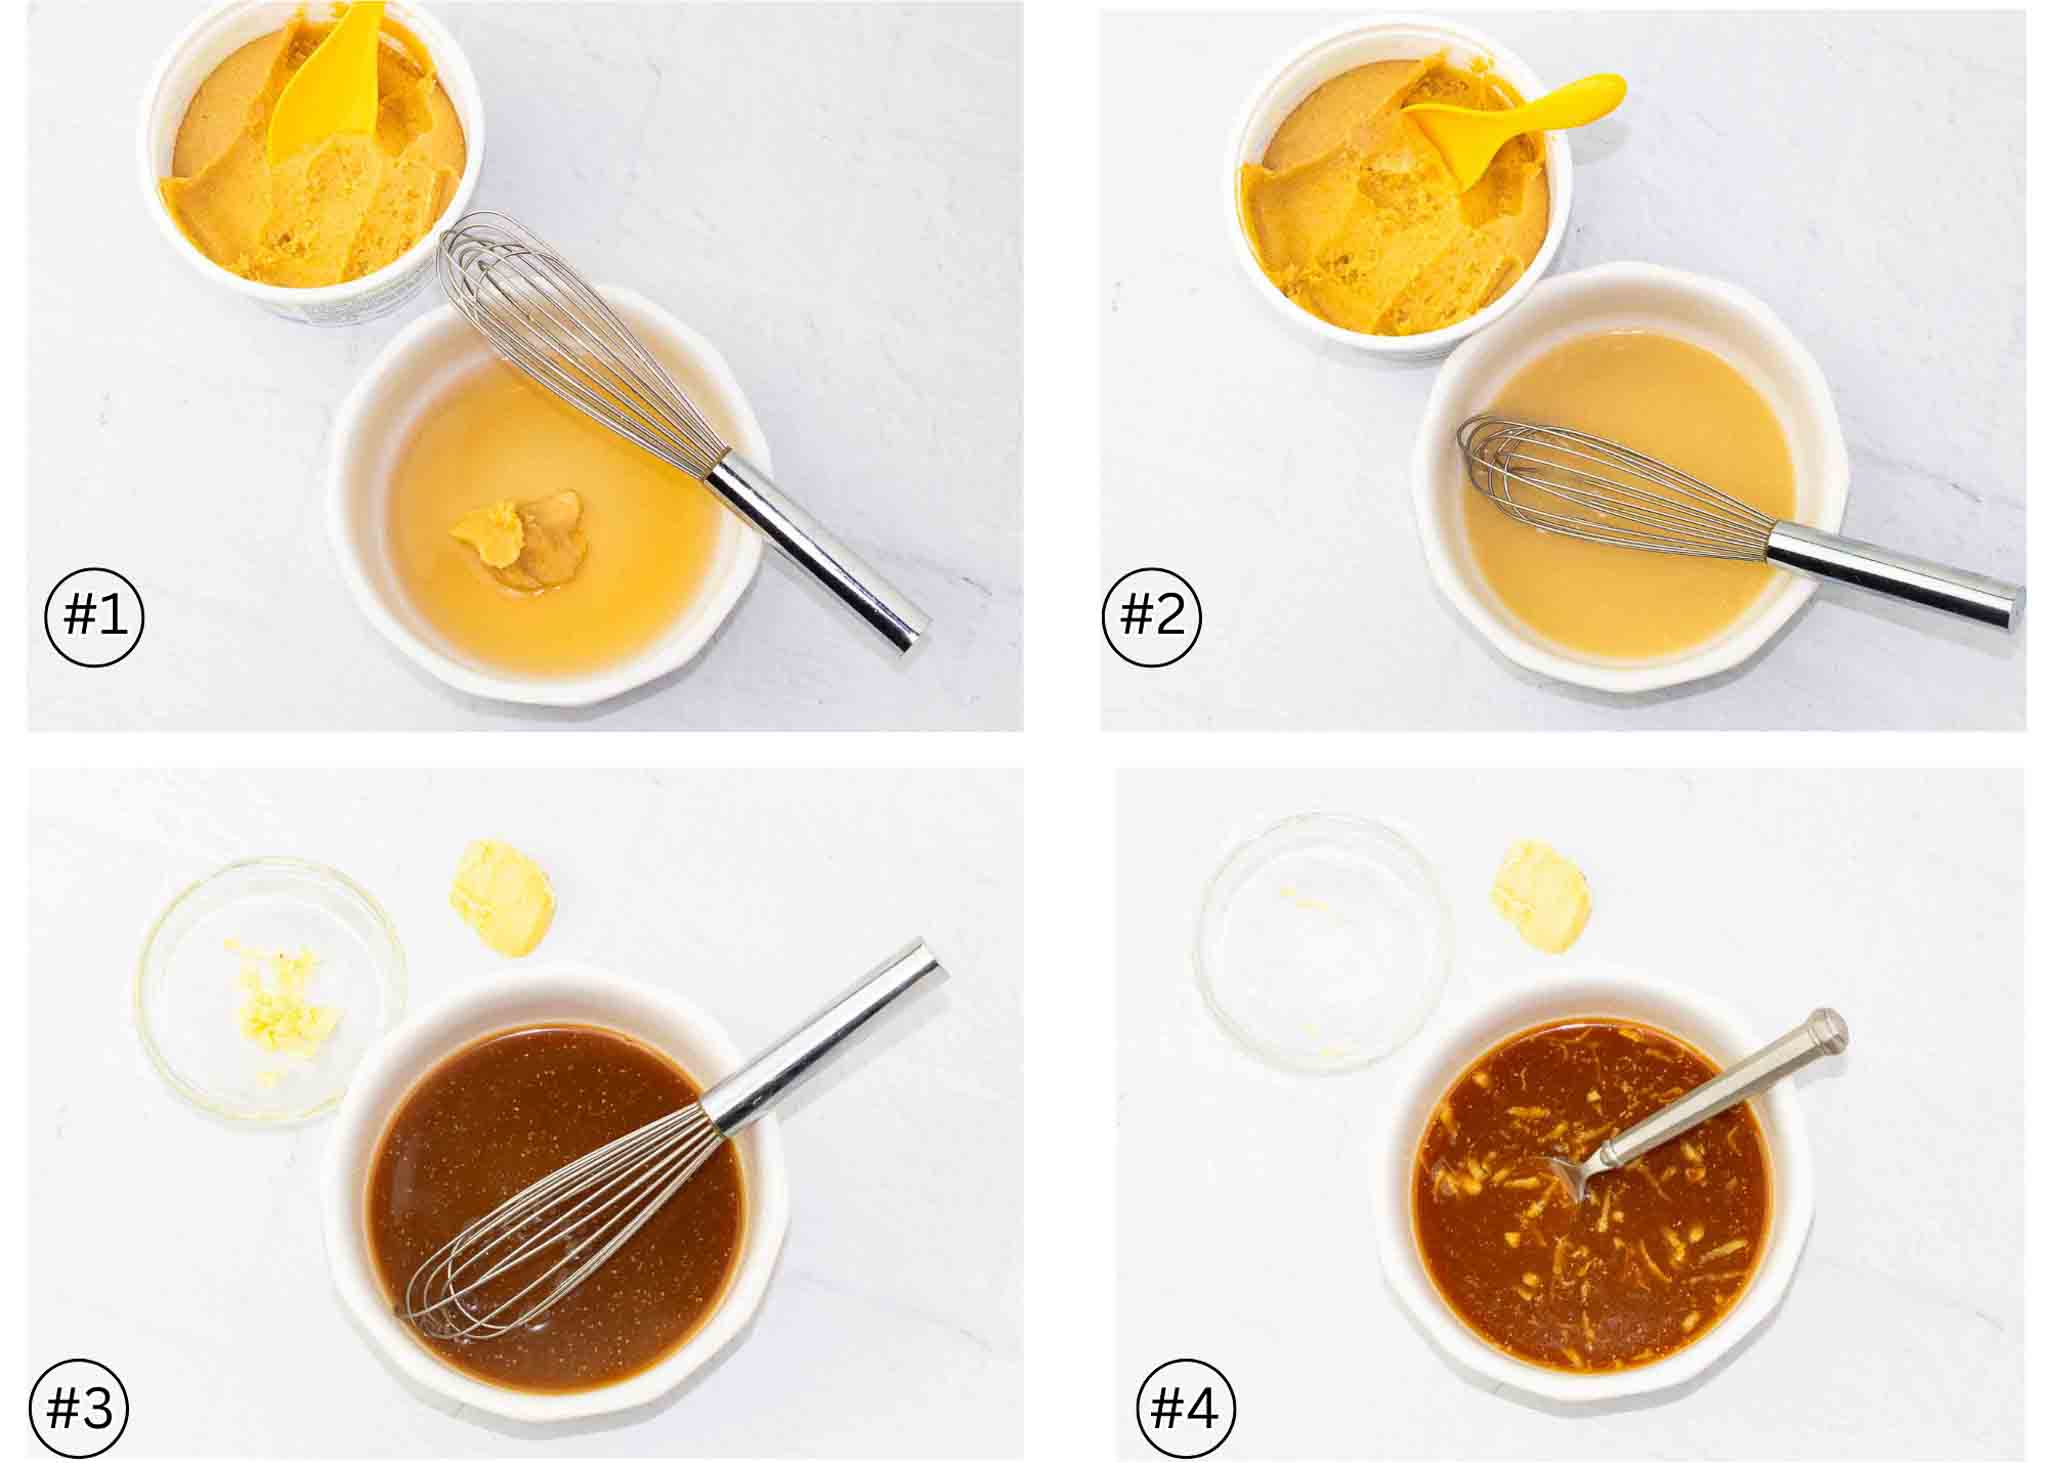 step-by-step photo 1-4 of how to make miso dressing.